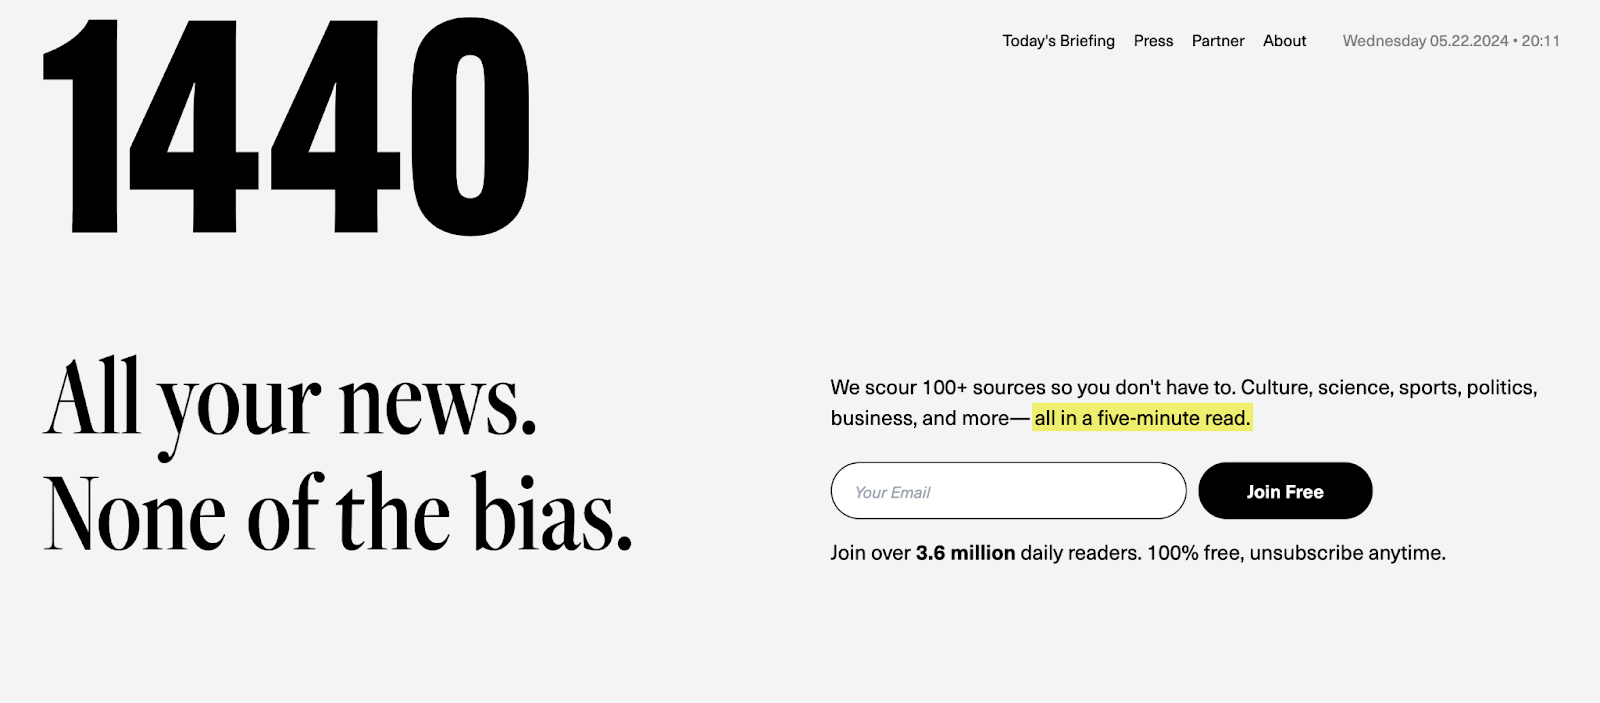 1440. All your news. None of the bias. We scour 100+ sources so you don’t have to. Culture, science, sports, politics, business, and more — all in a five-minute read. 